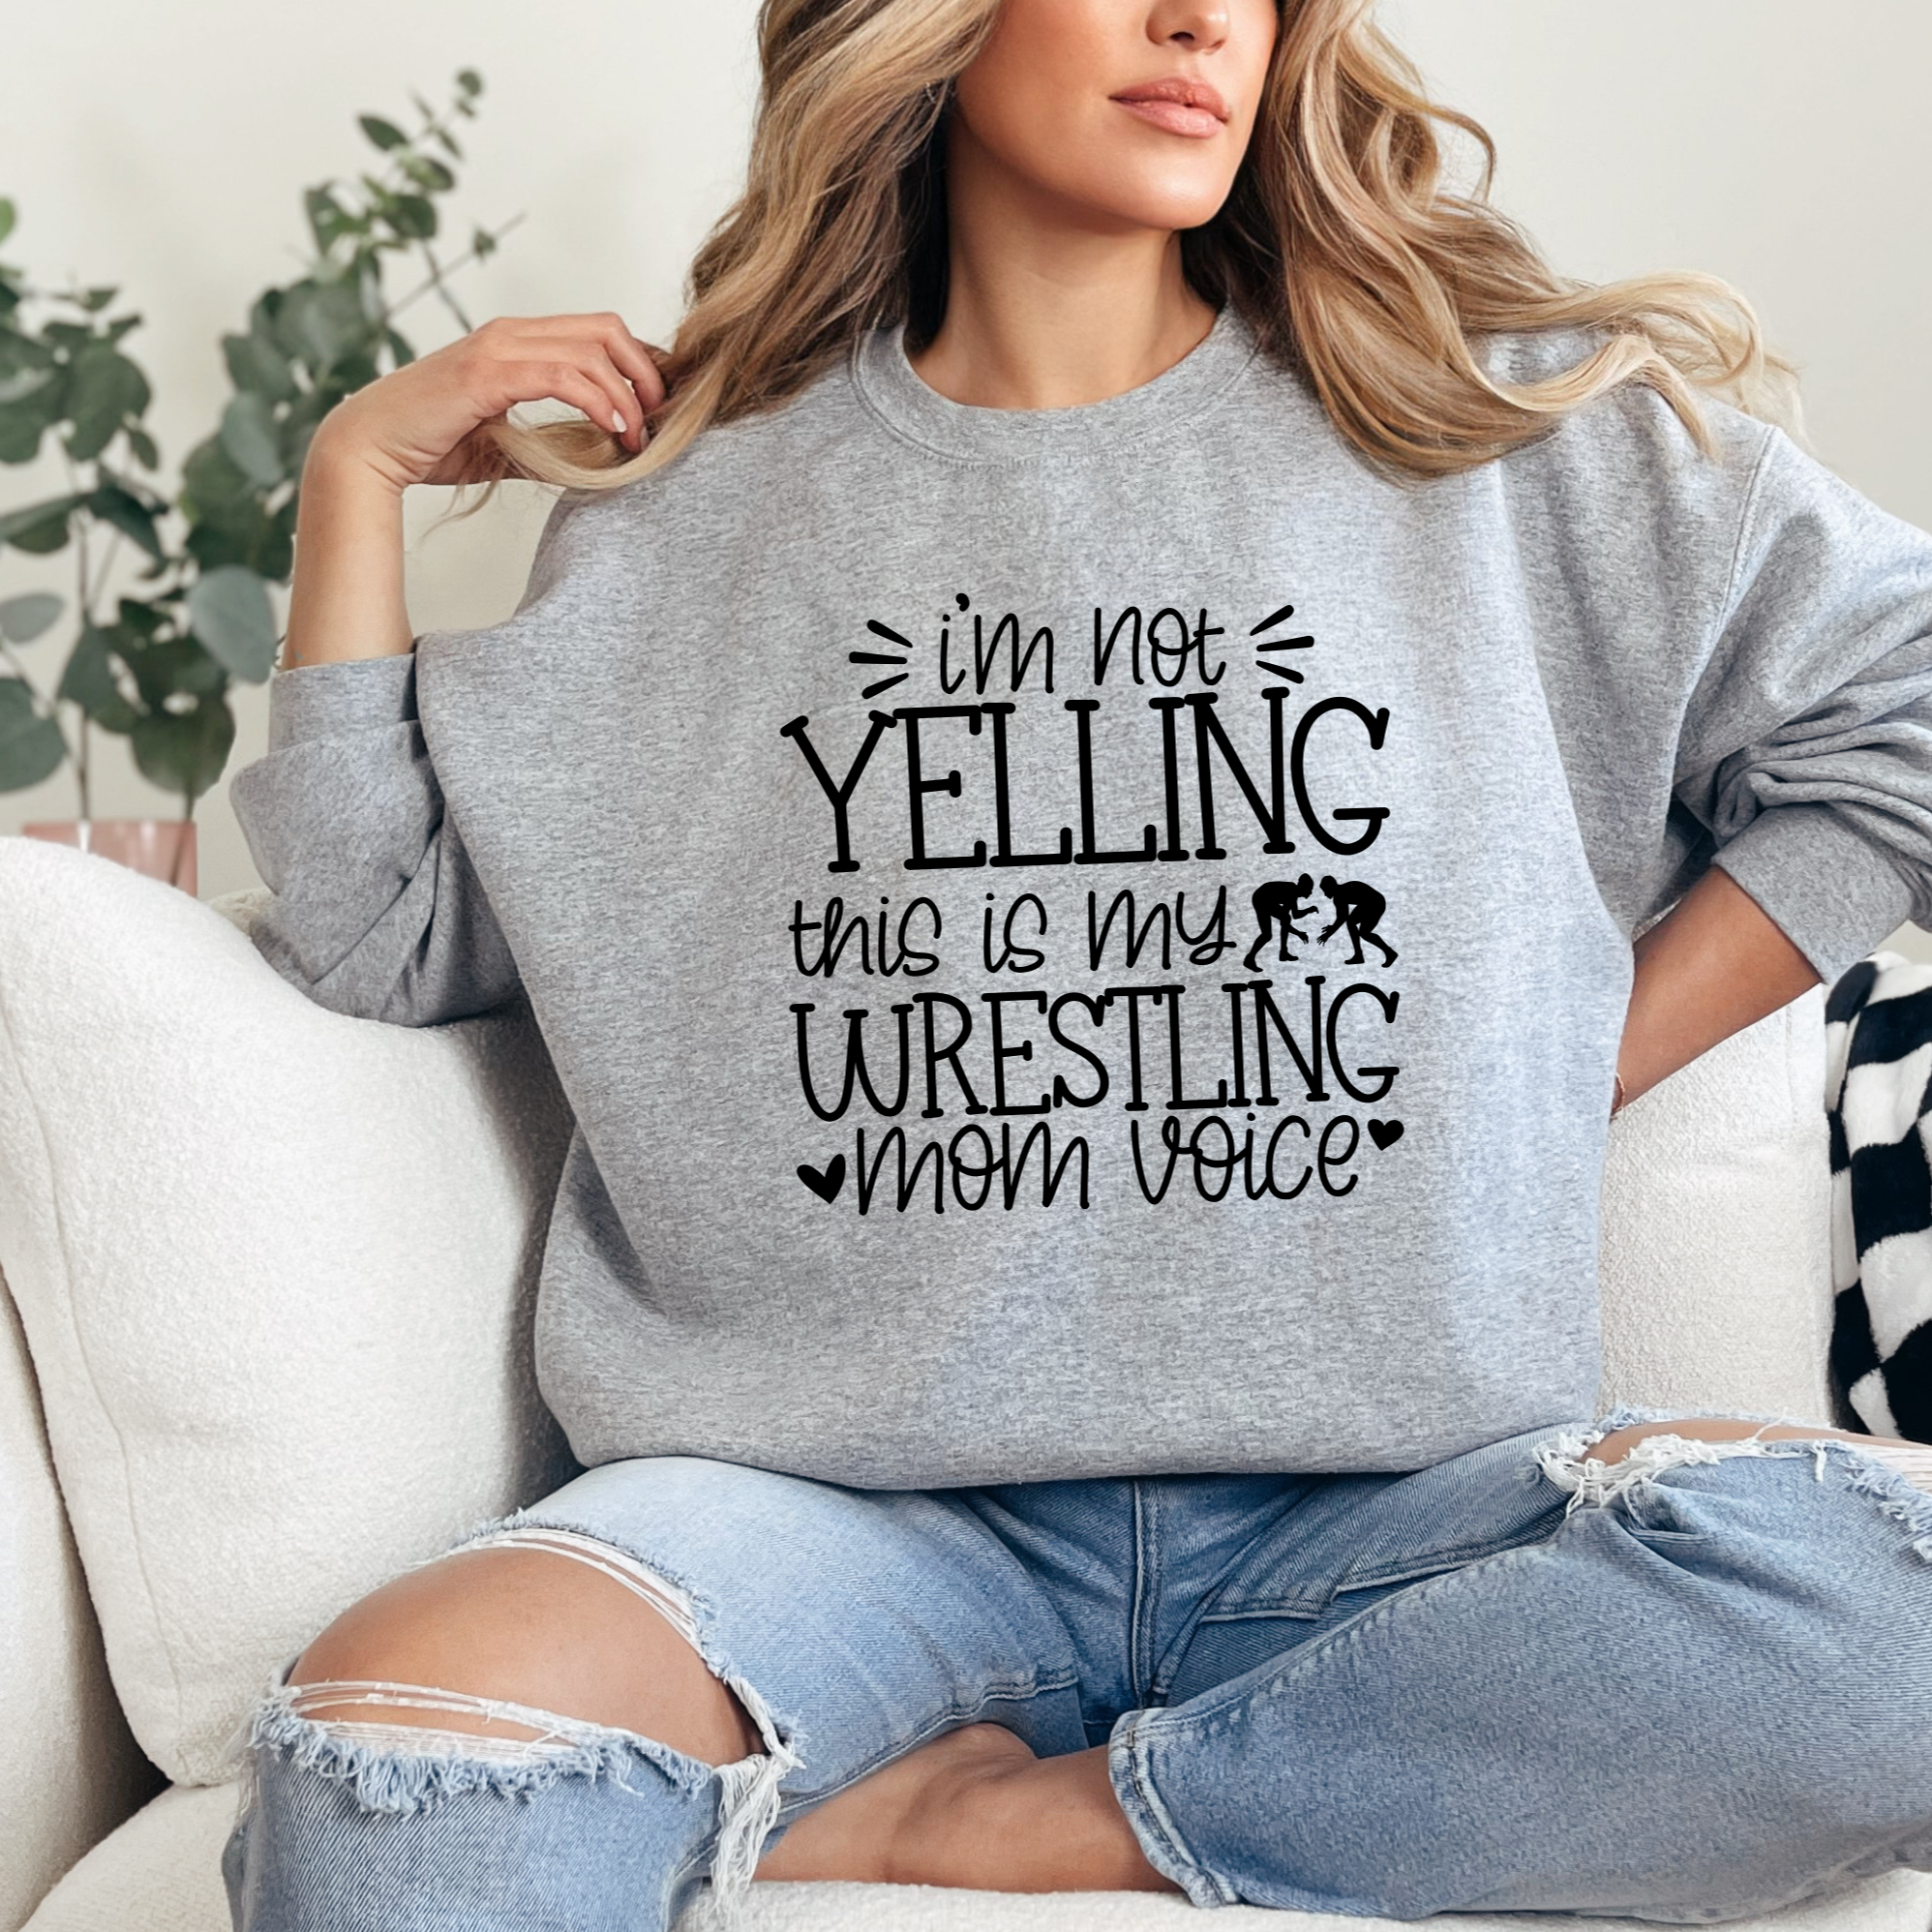 I'm Not Yelling Sports Mom Voice Tee OR Sweatshirt - MULTIPLE SPORTS